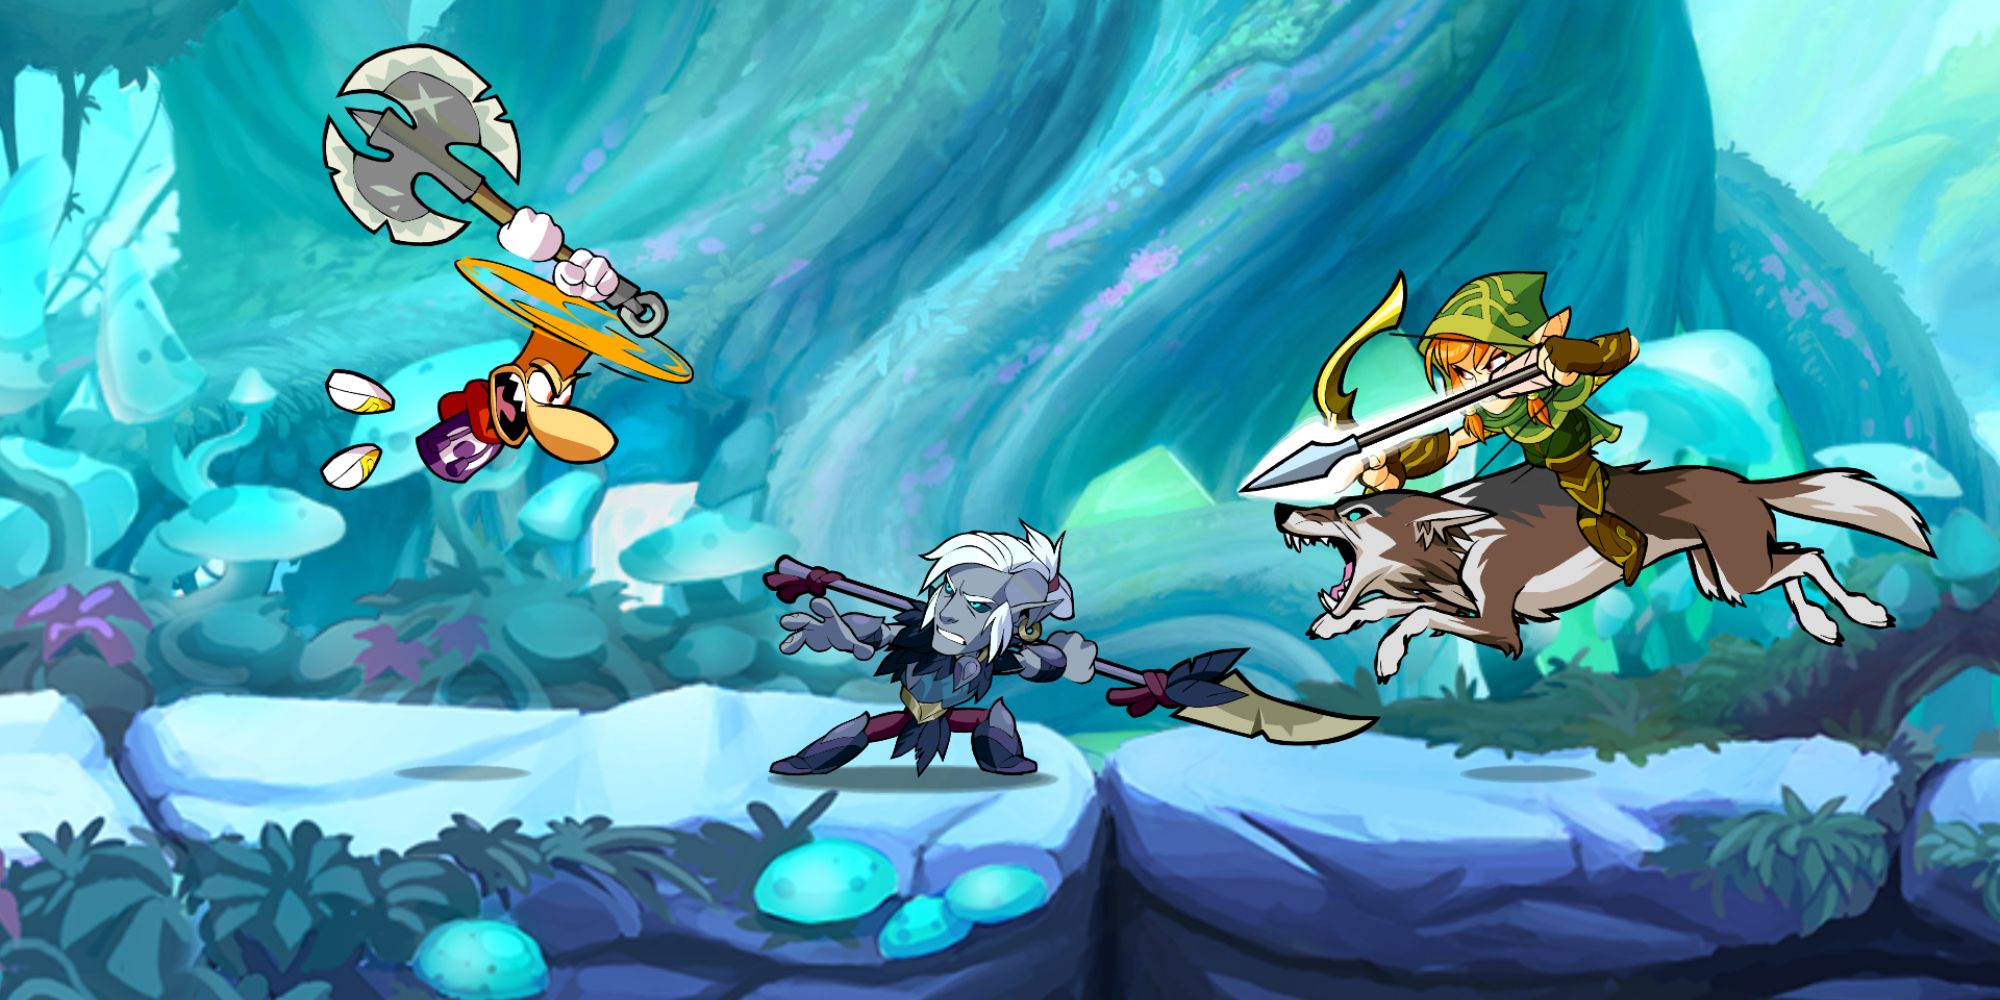 Rayman fighting two Brawlhalla characters